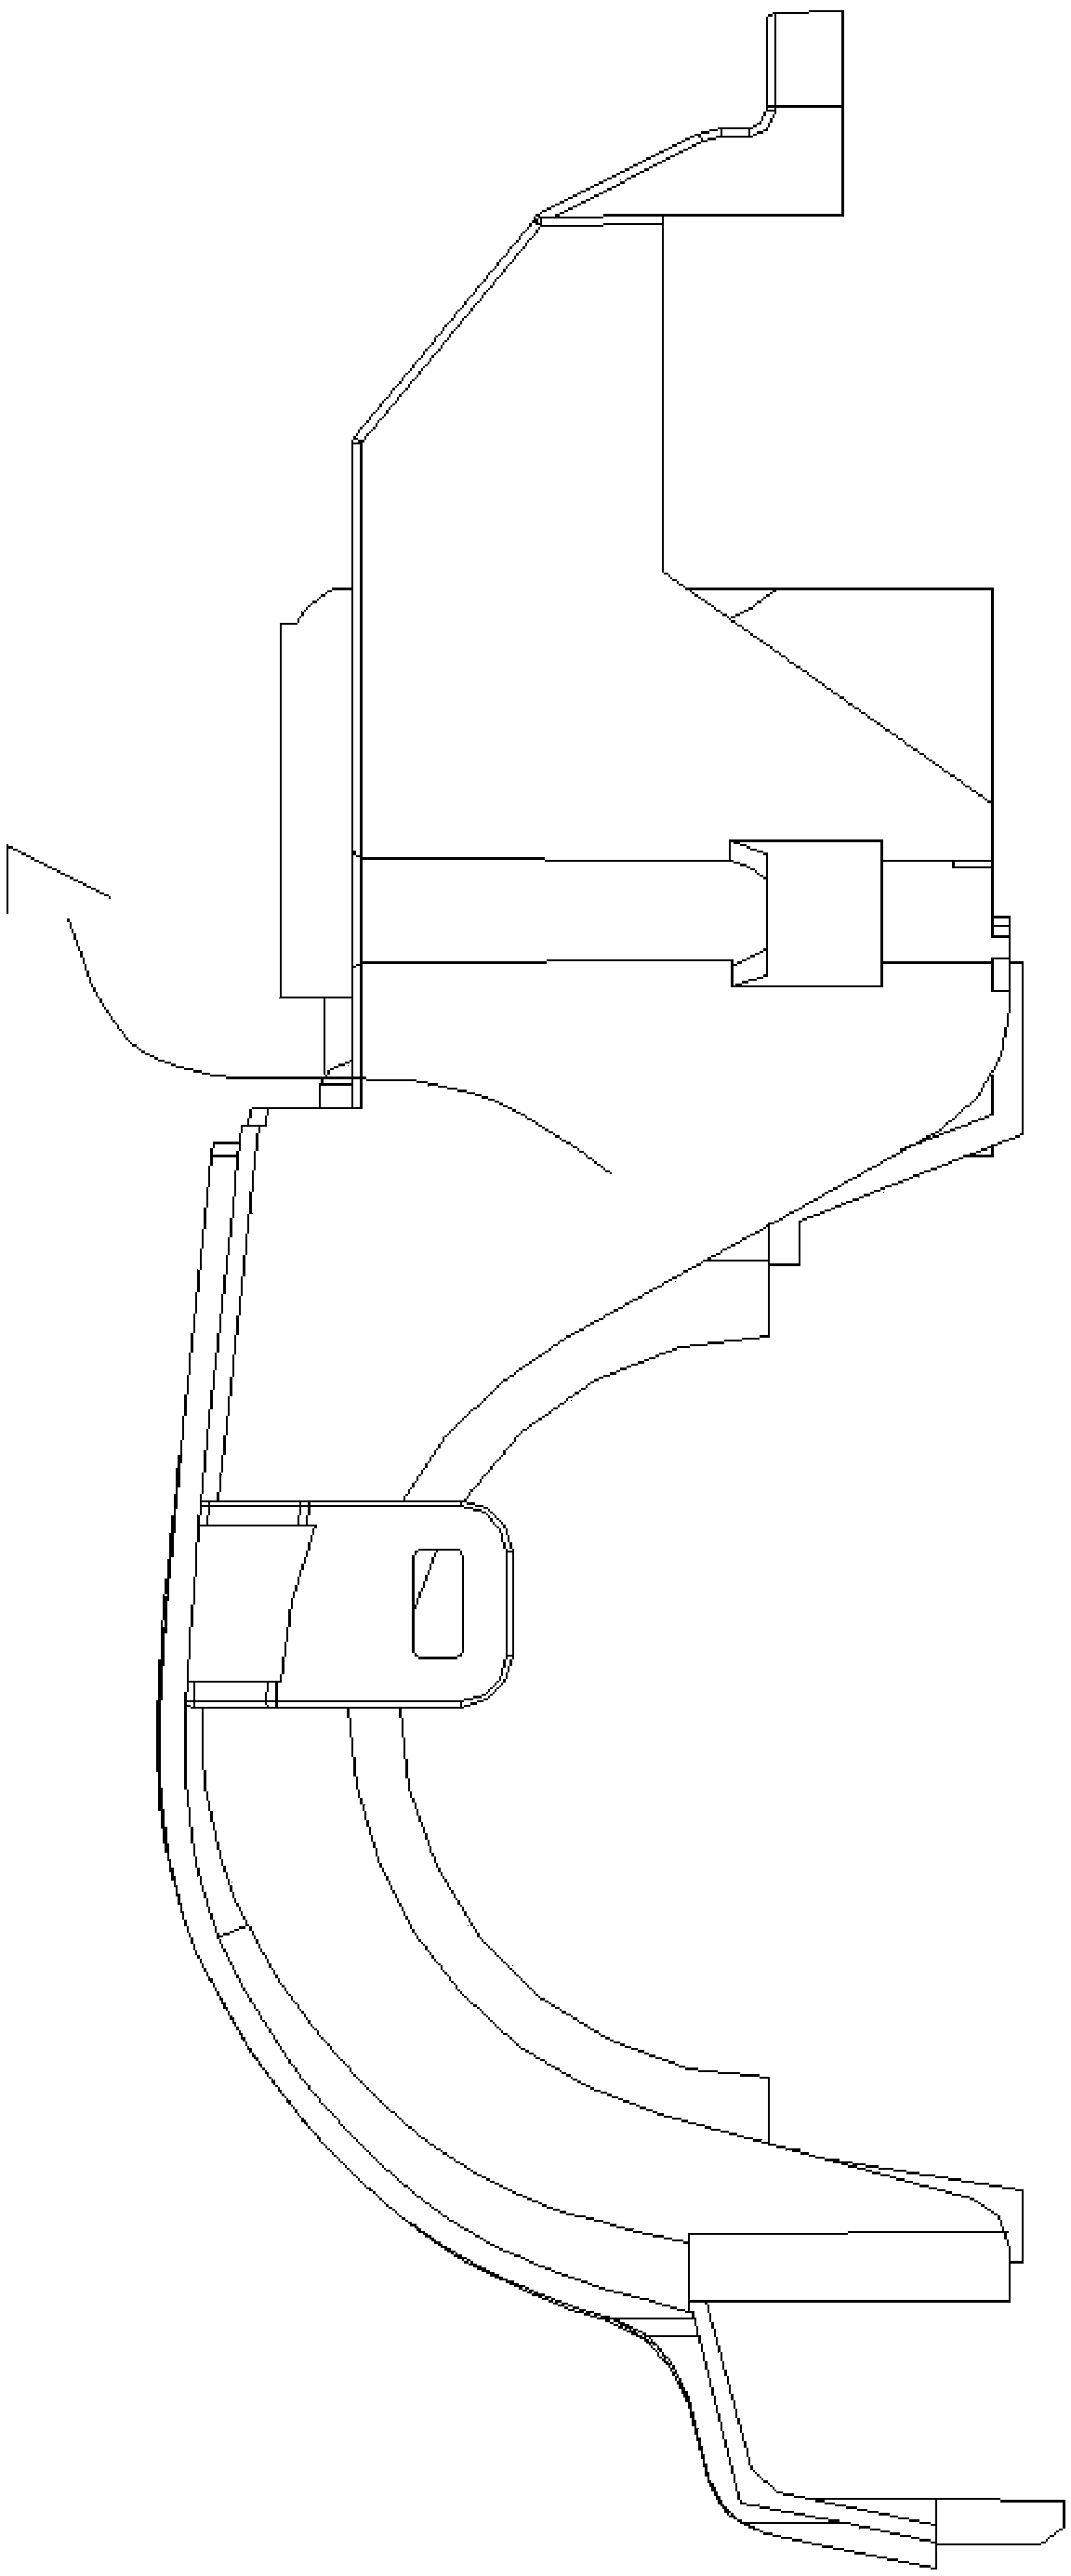 Dust collector and dust collector shell with retaining ribs